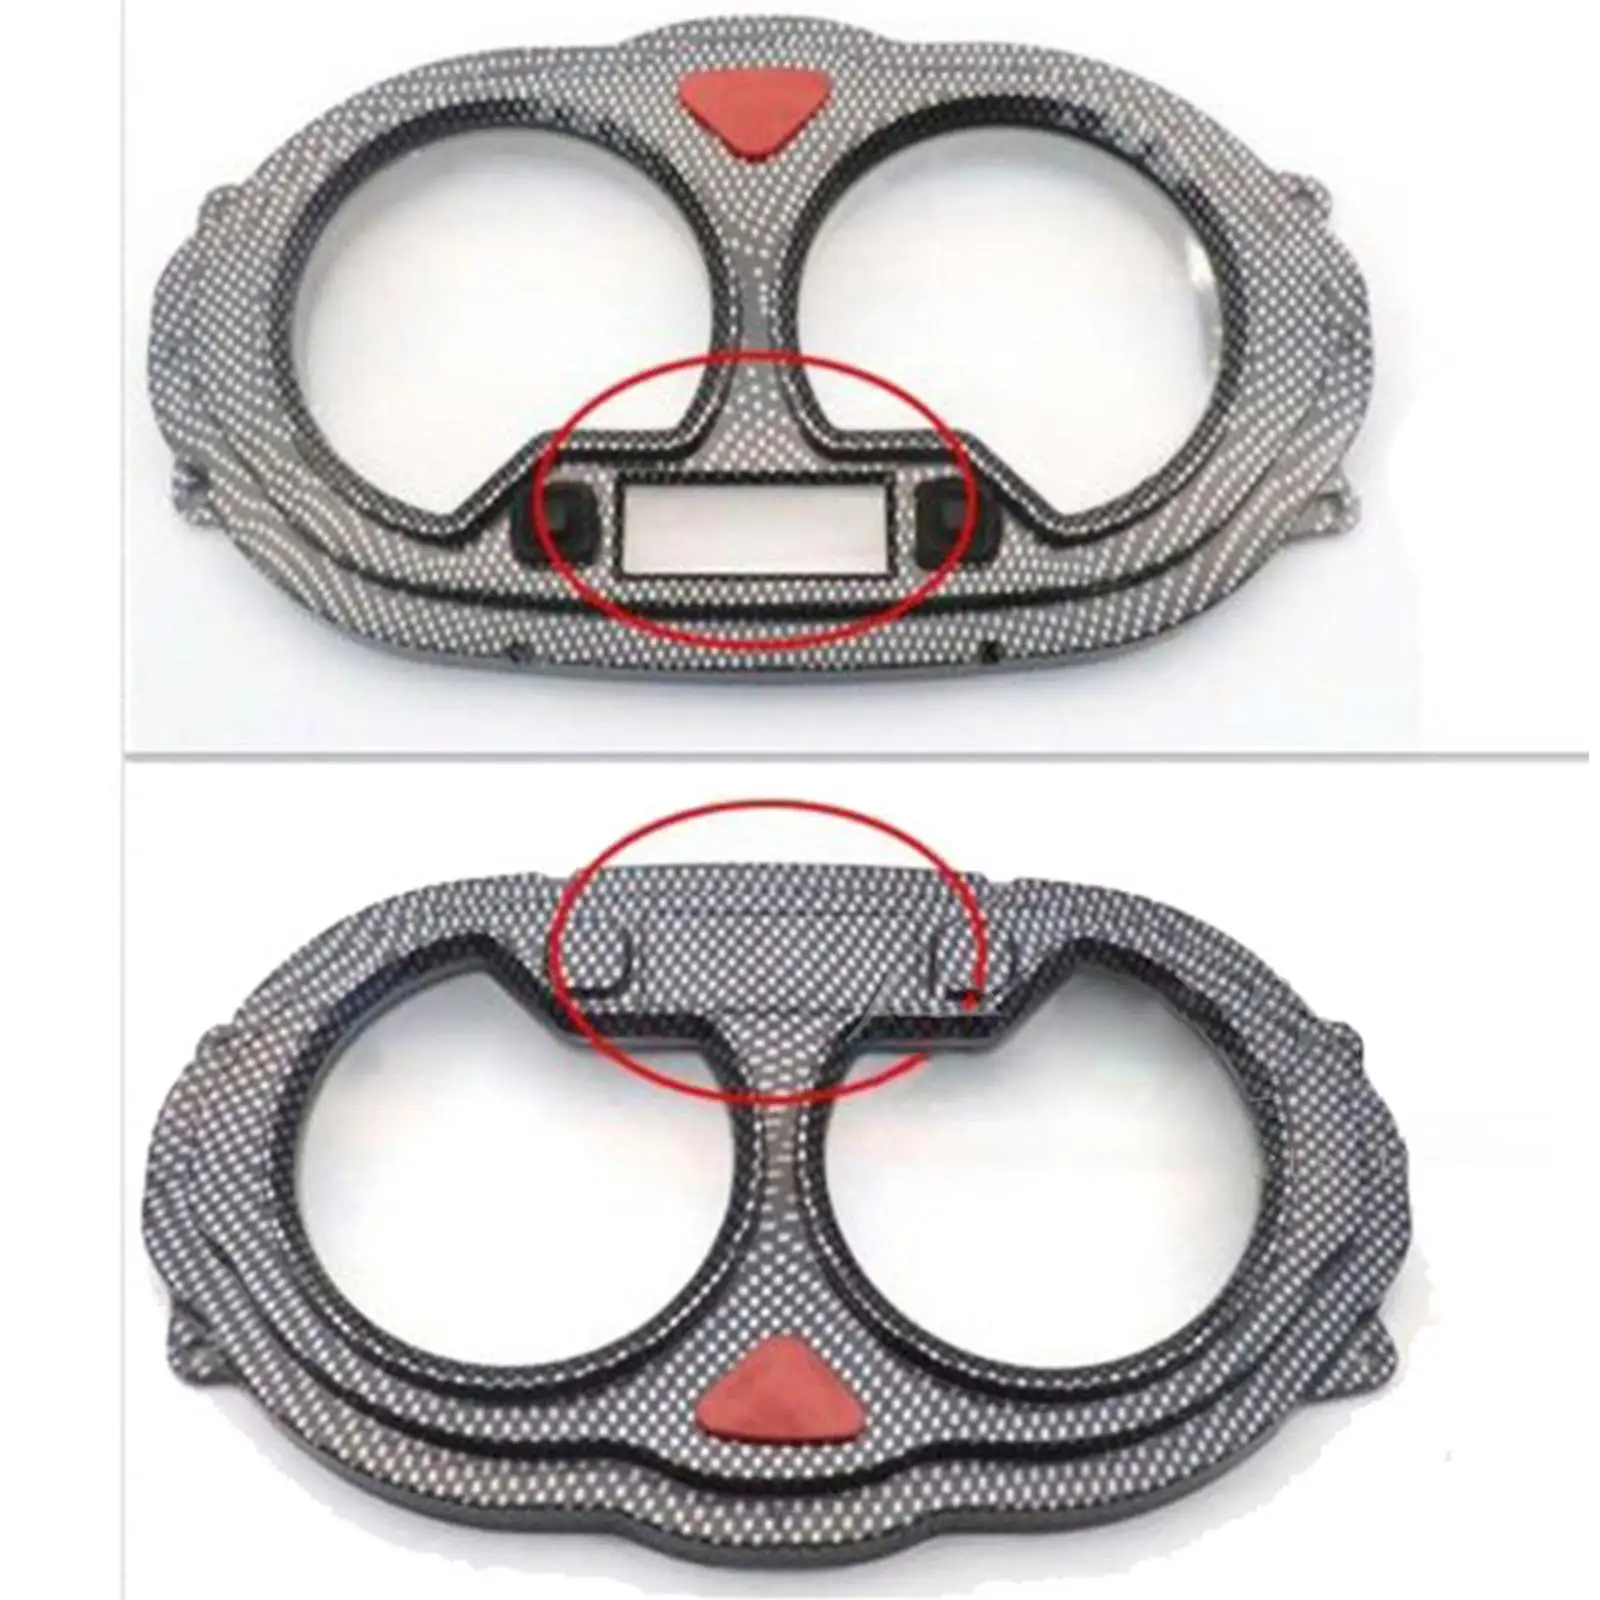 Portable Upper Shell of Instrument Motorcycle Trim Odometer Cover Tachometer Gauge Housing Cover for B08 Instrument Case